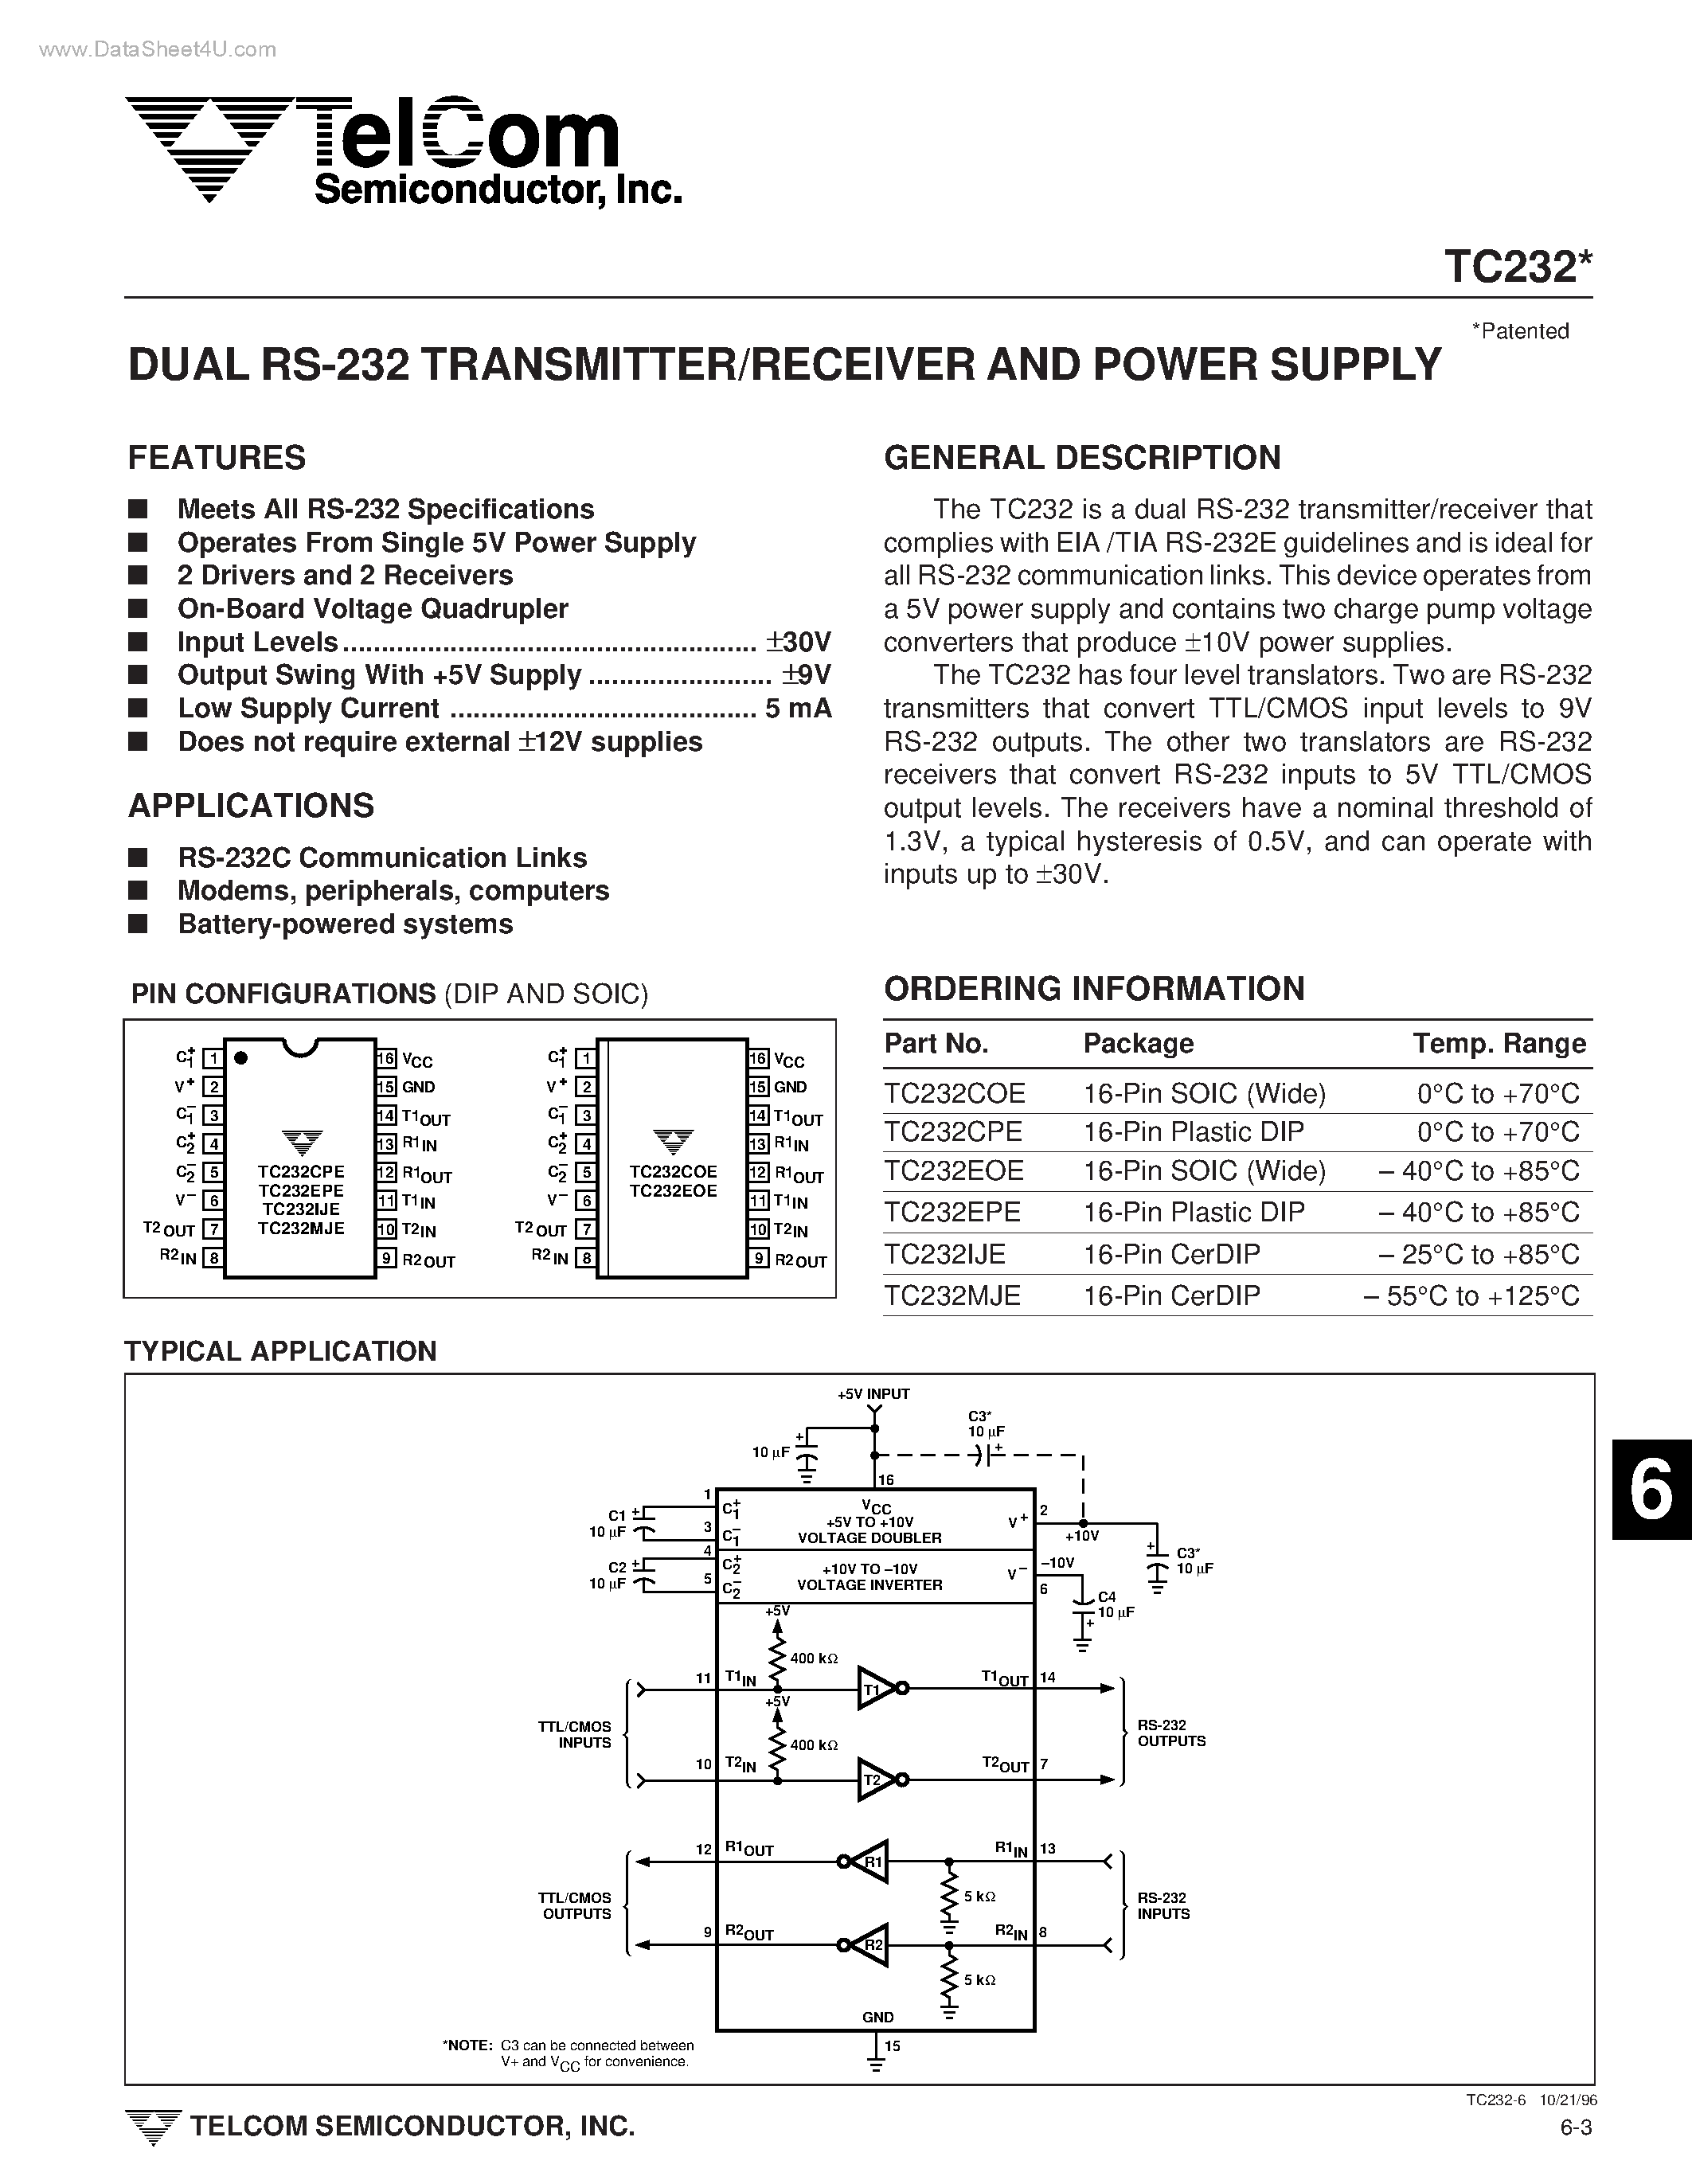 Datasheet TC232 - DUAL RS-232 TRANSMITTER/RECEIVER AND POWER SUPPLY page 1